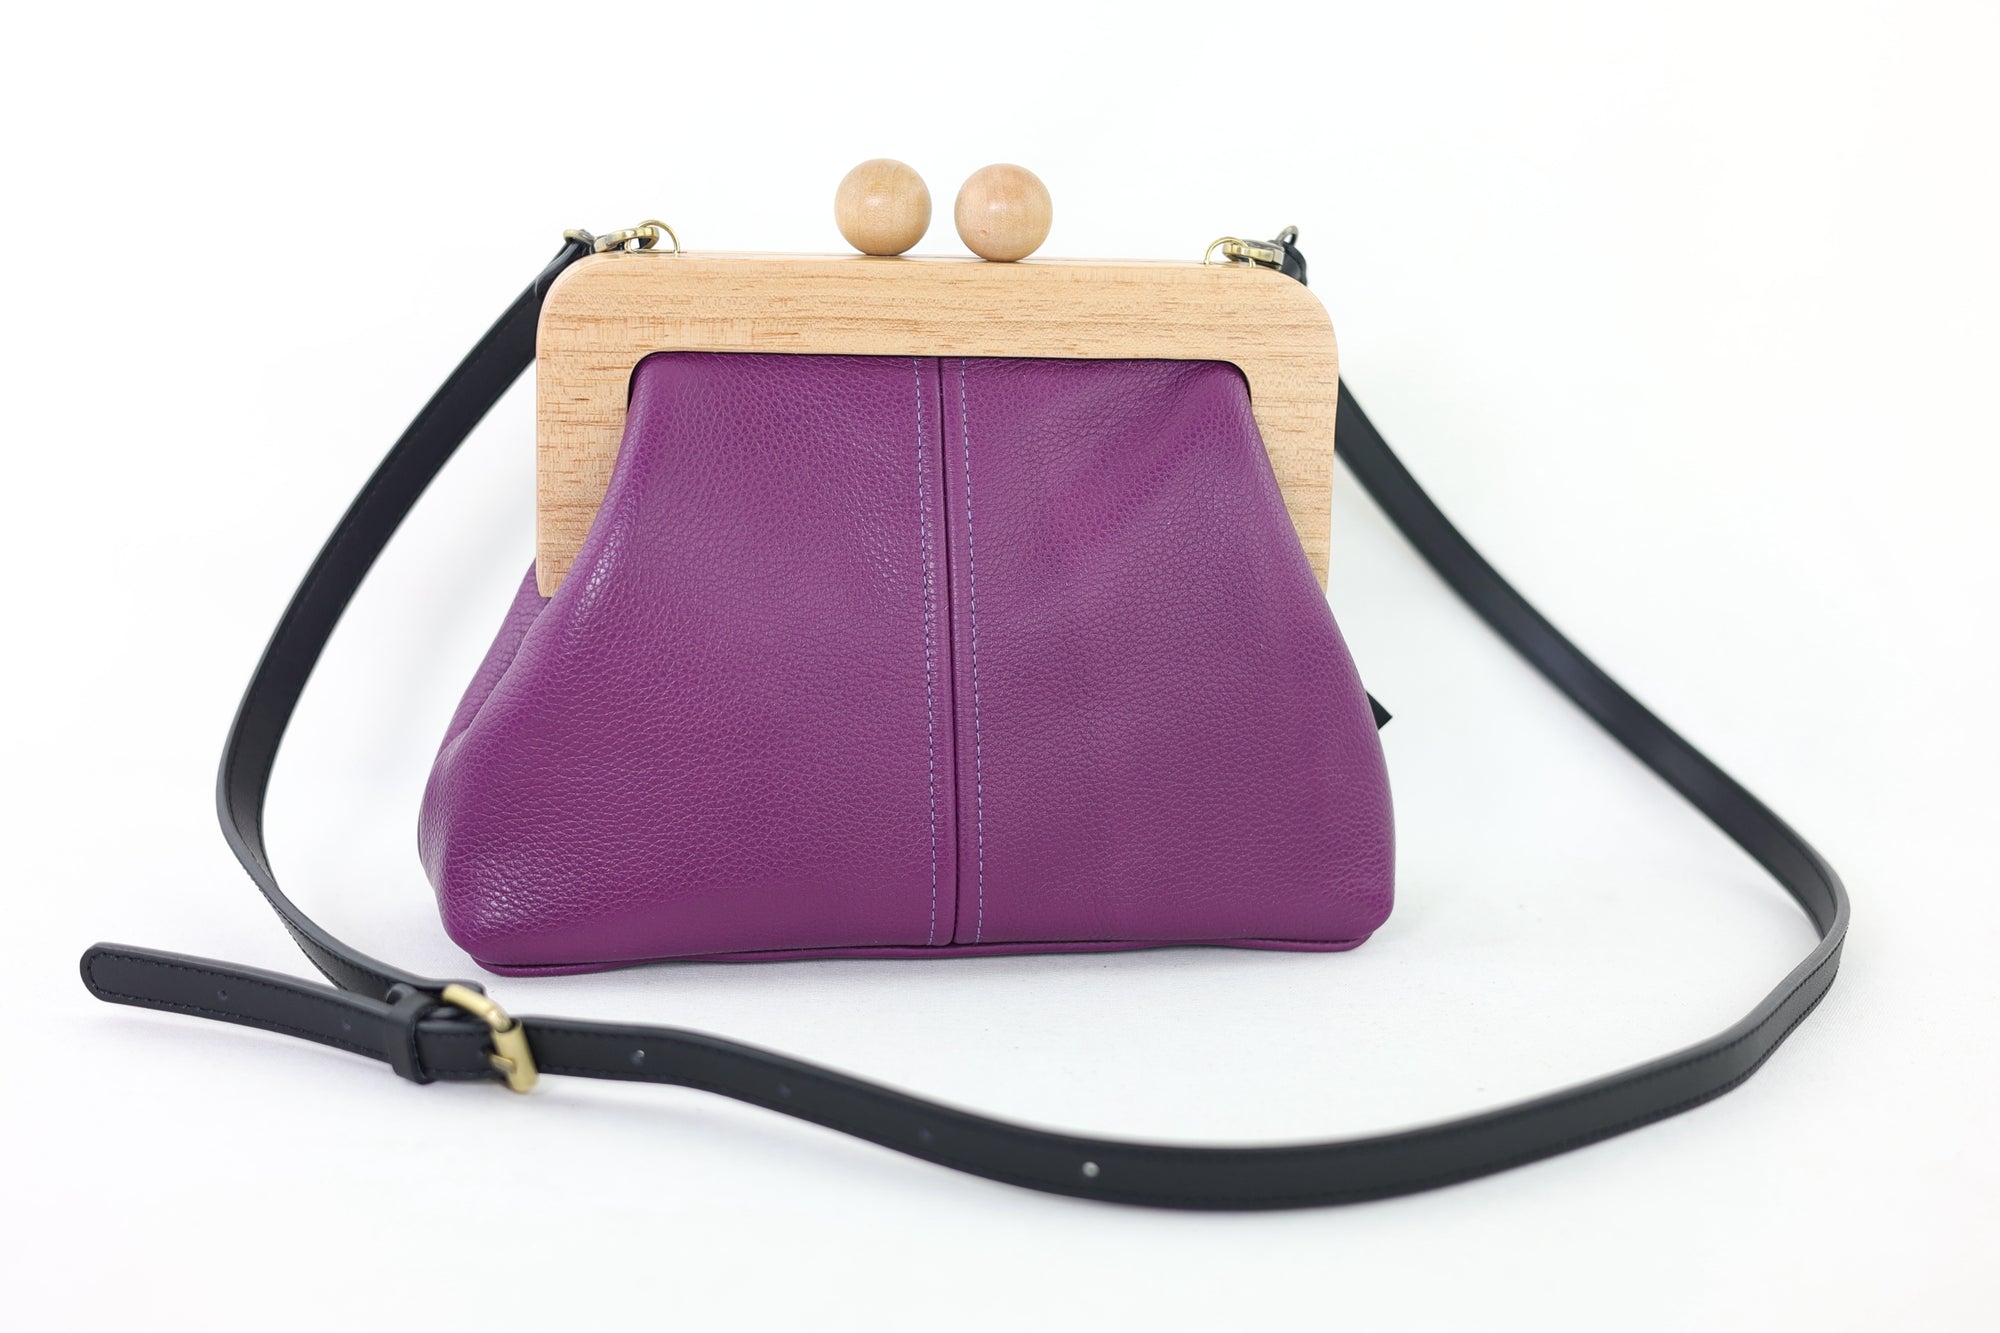 Women's Purple Genuine Leather Clutch Bag with Strap | PINK OASIS